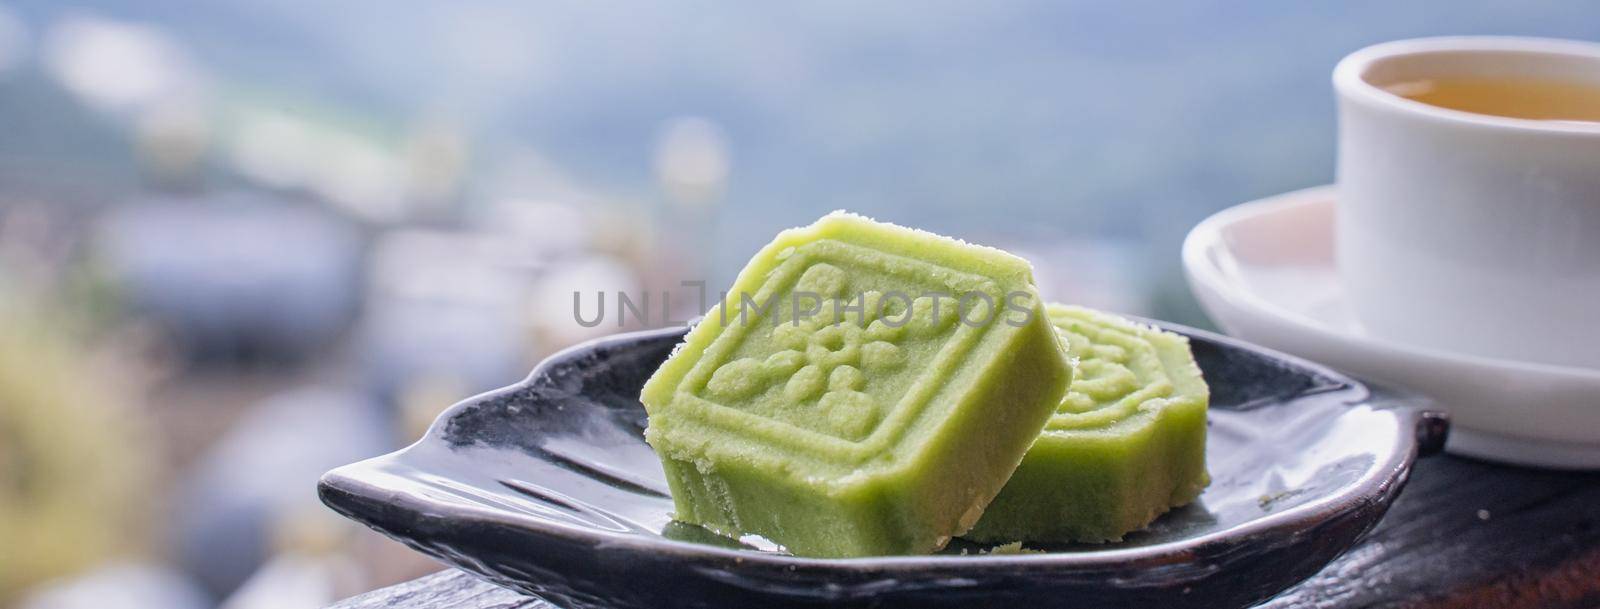 Delicious green mung bean cake with black tea plate on wooden railing of a teahouse in Taiwan with beautiful landscape in background, close up.